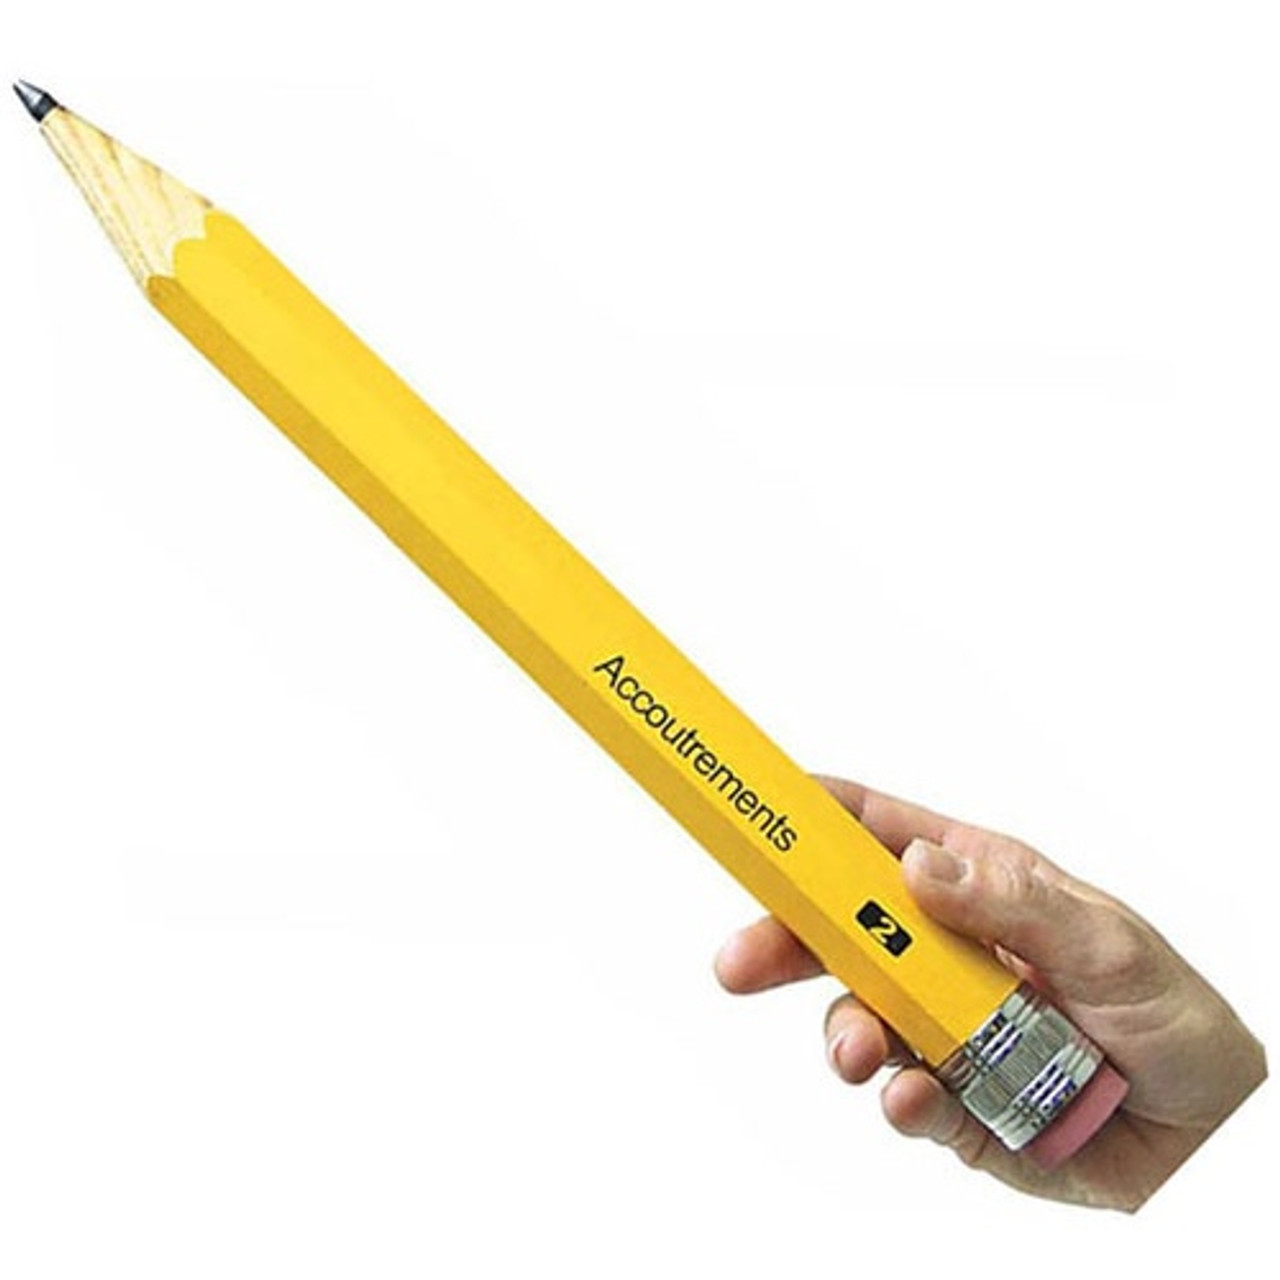 Wooden Pencil -Novelty Children Toy Huge-Big Pencil with Cap and